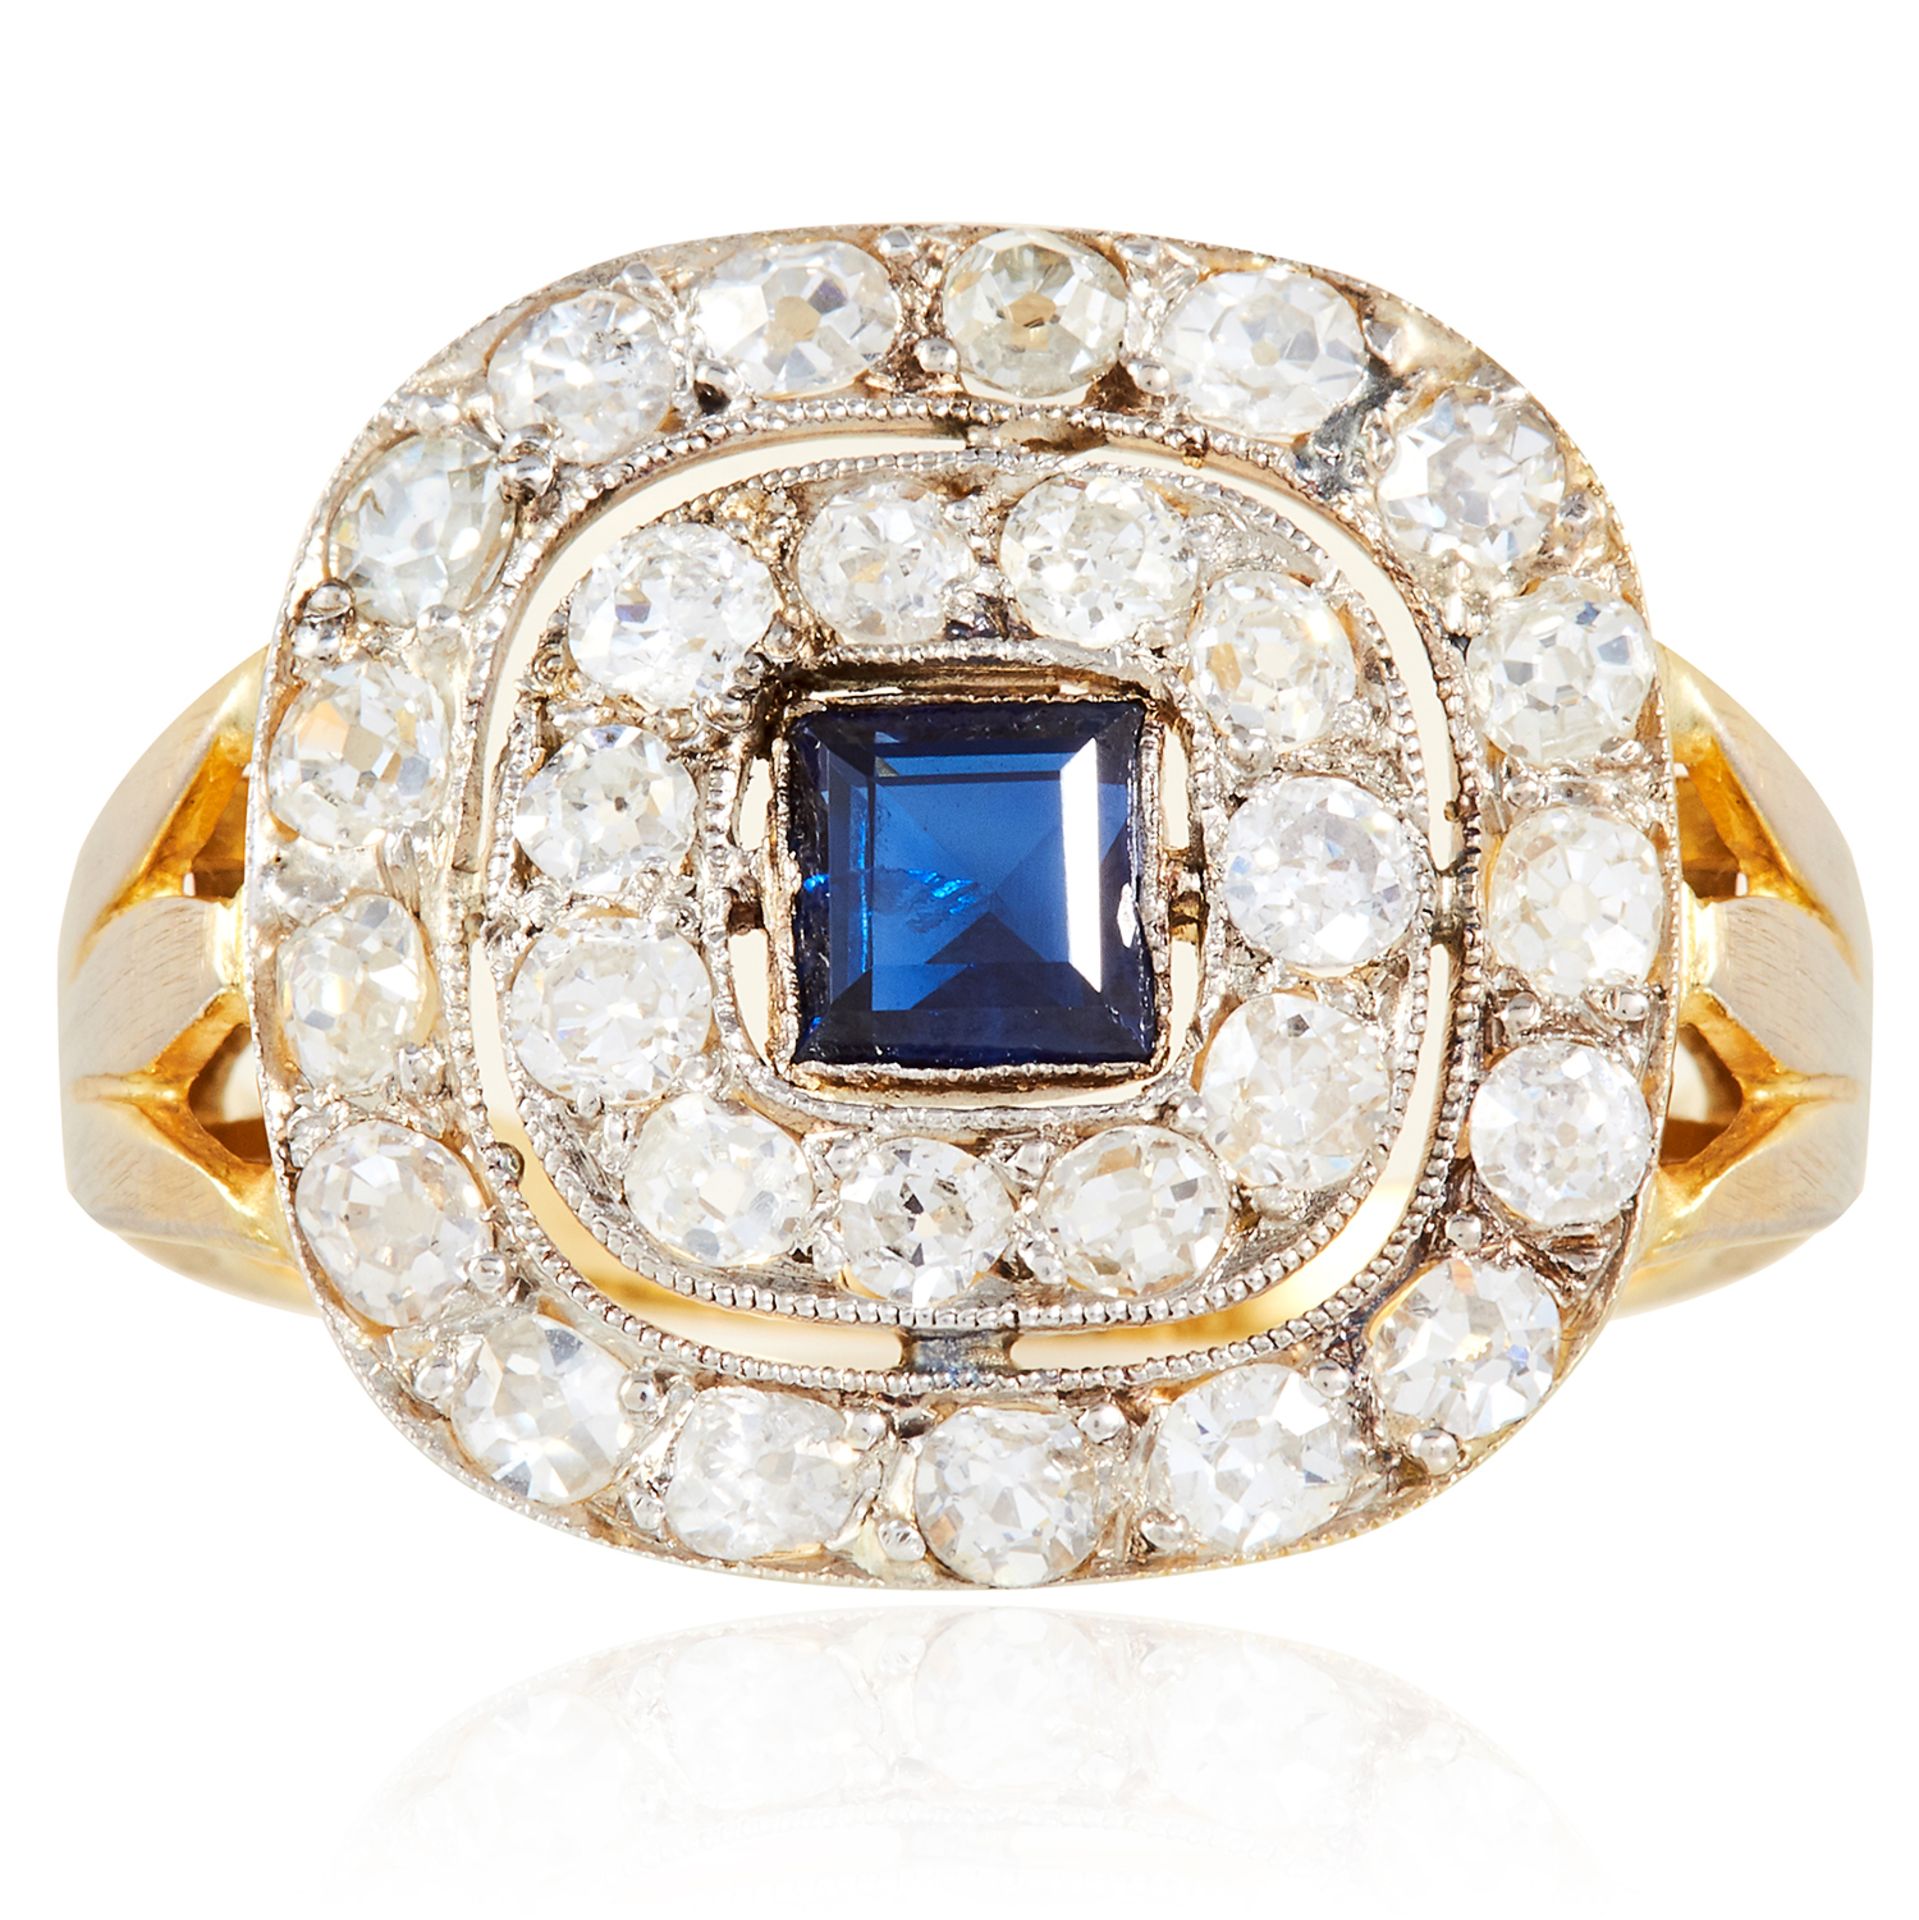 A SAPPHIRE AND DIAMOND DRESS RING in high carat yellow gold, set with a square cut sapphire of